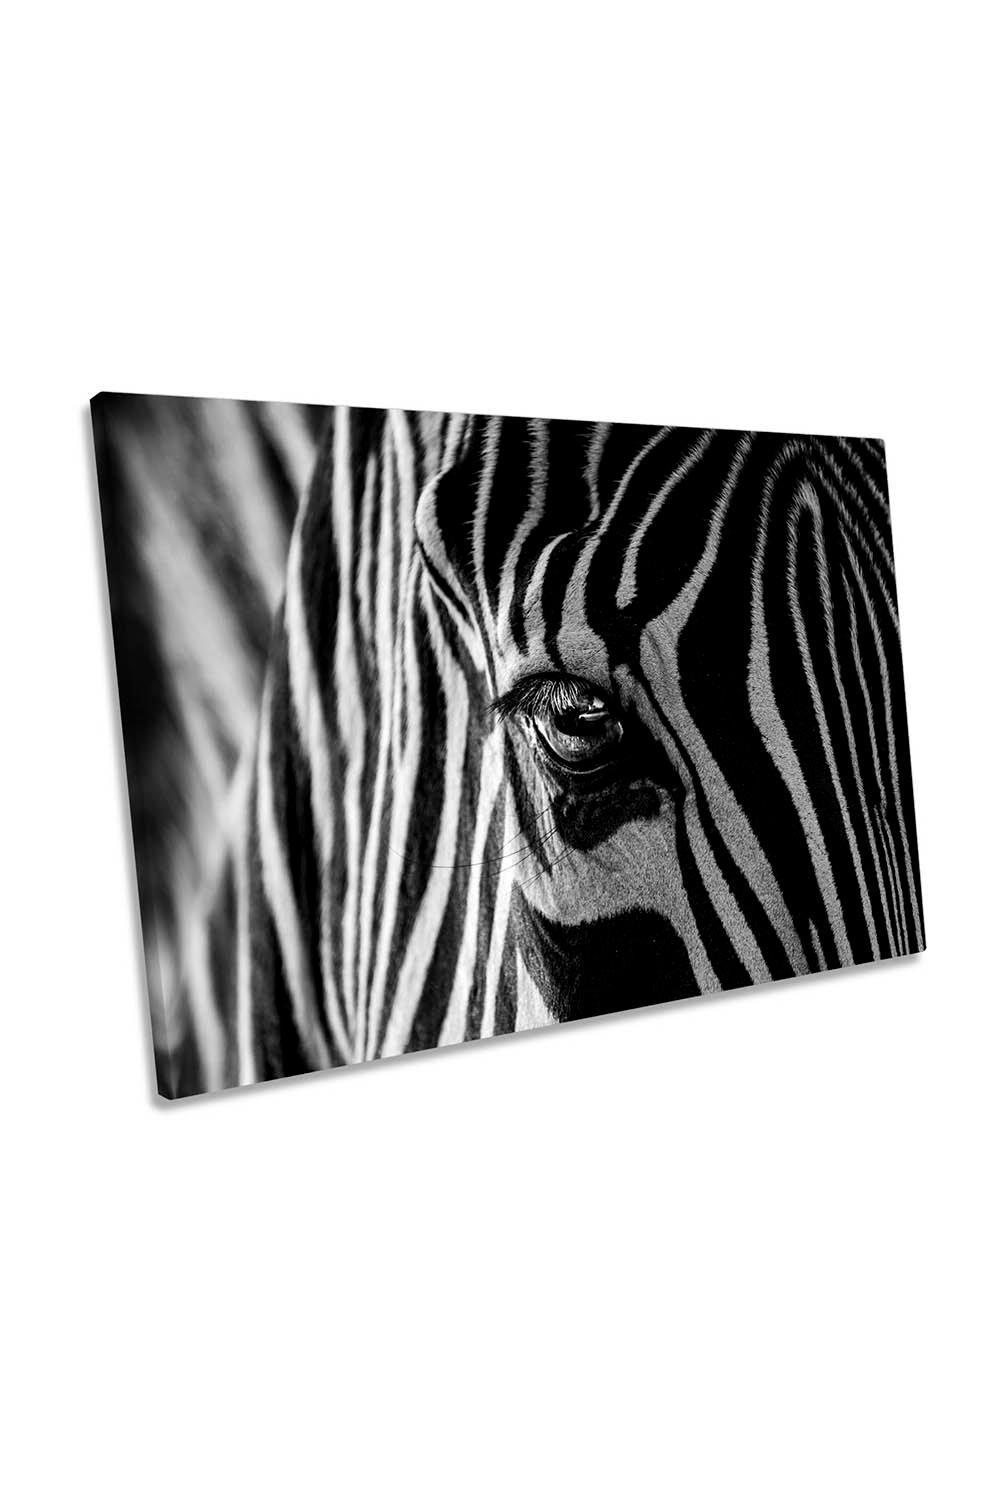 Abstract Zebra Black and White Stripe Canvas Wall Art Picture Print